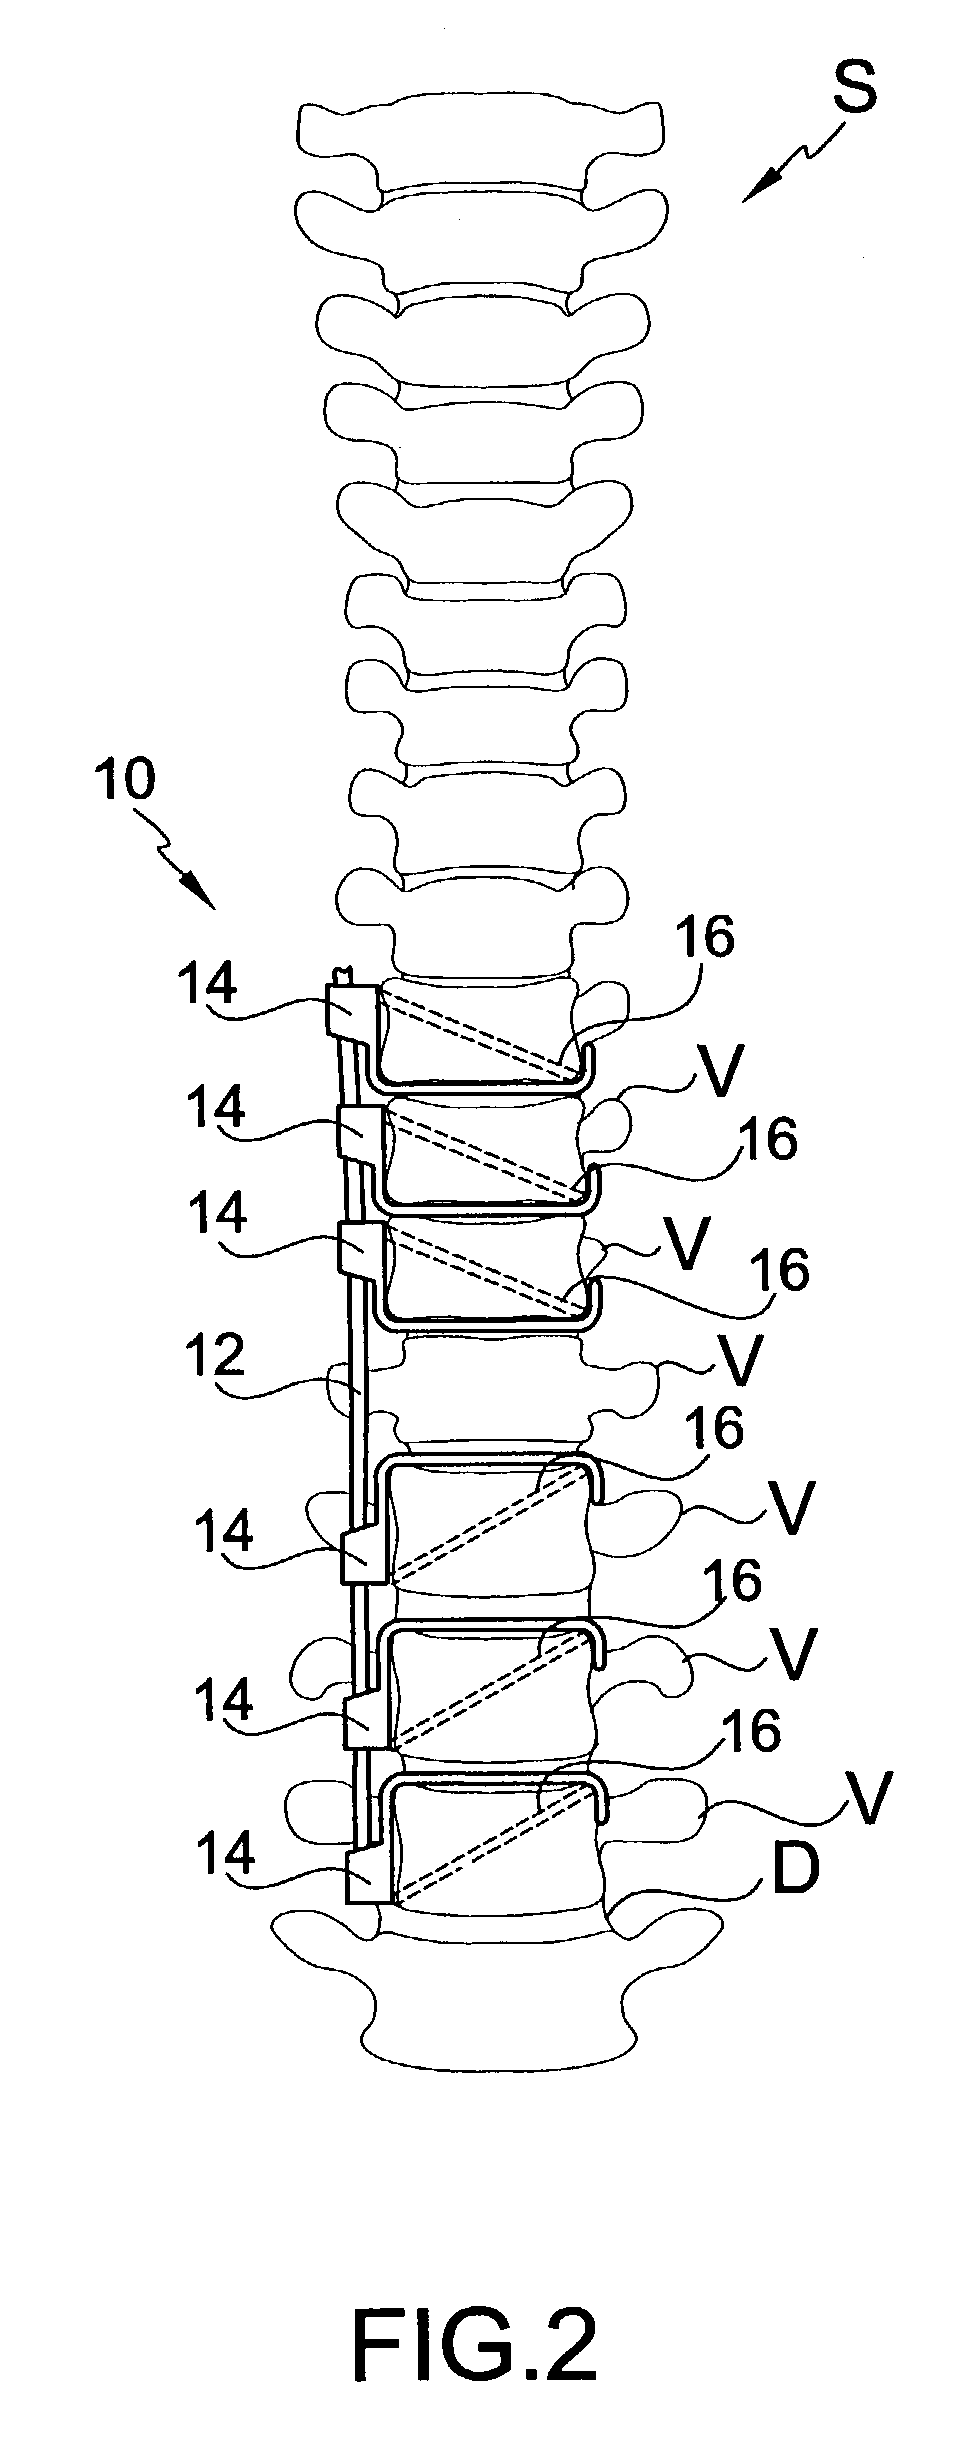 Connector for attaching an alignment rod to a bone structure